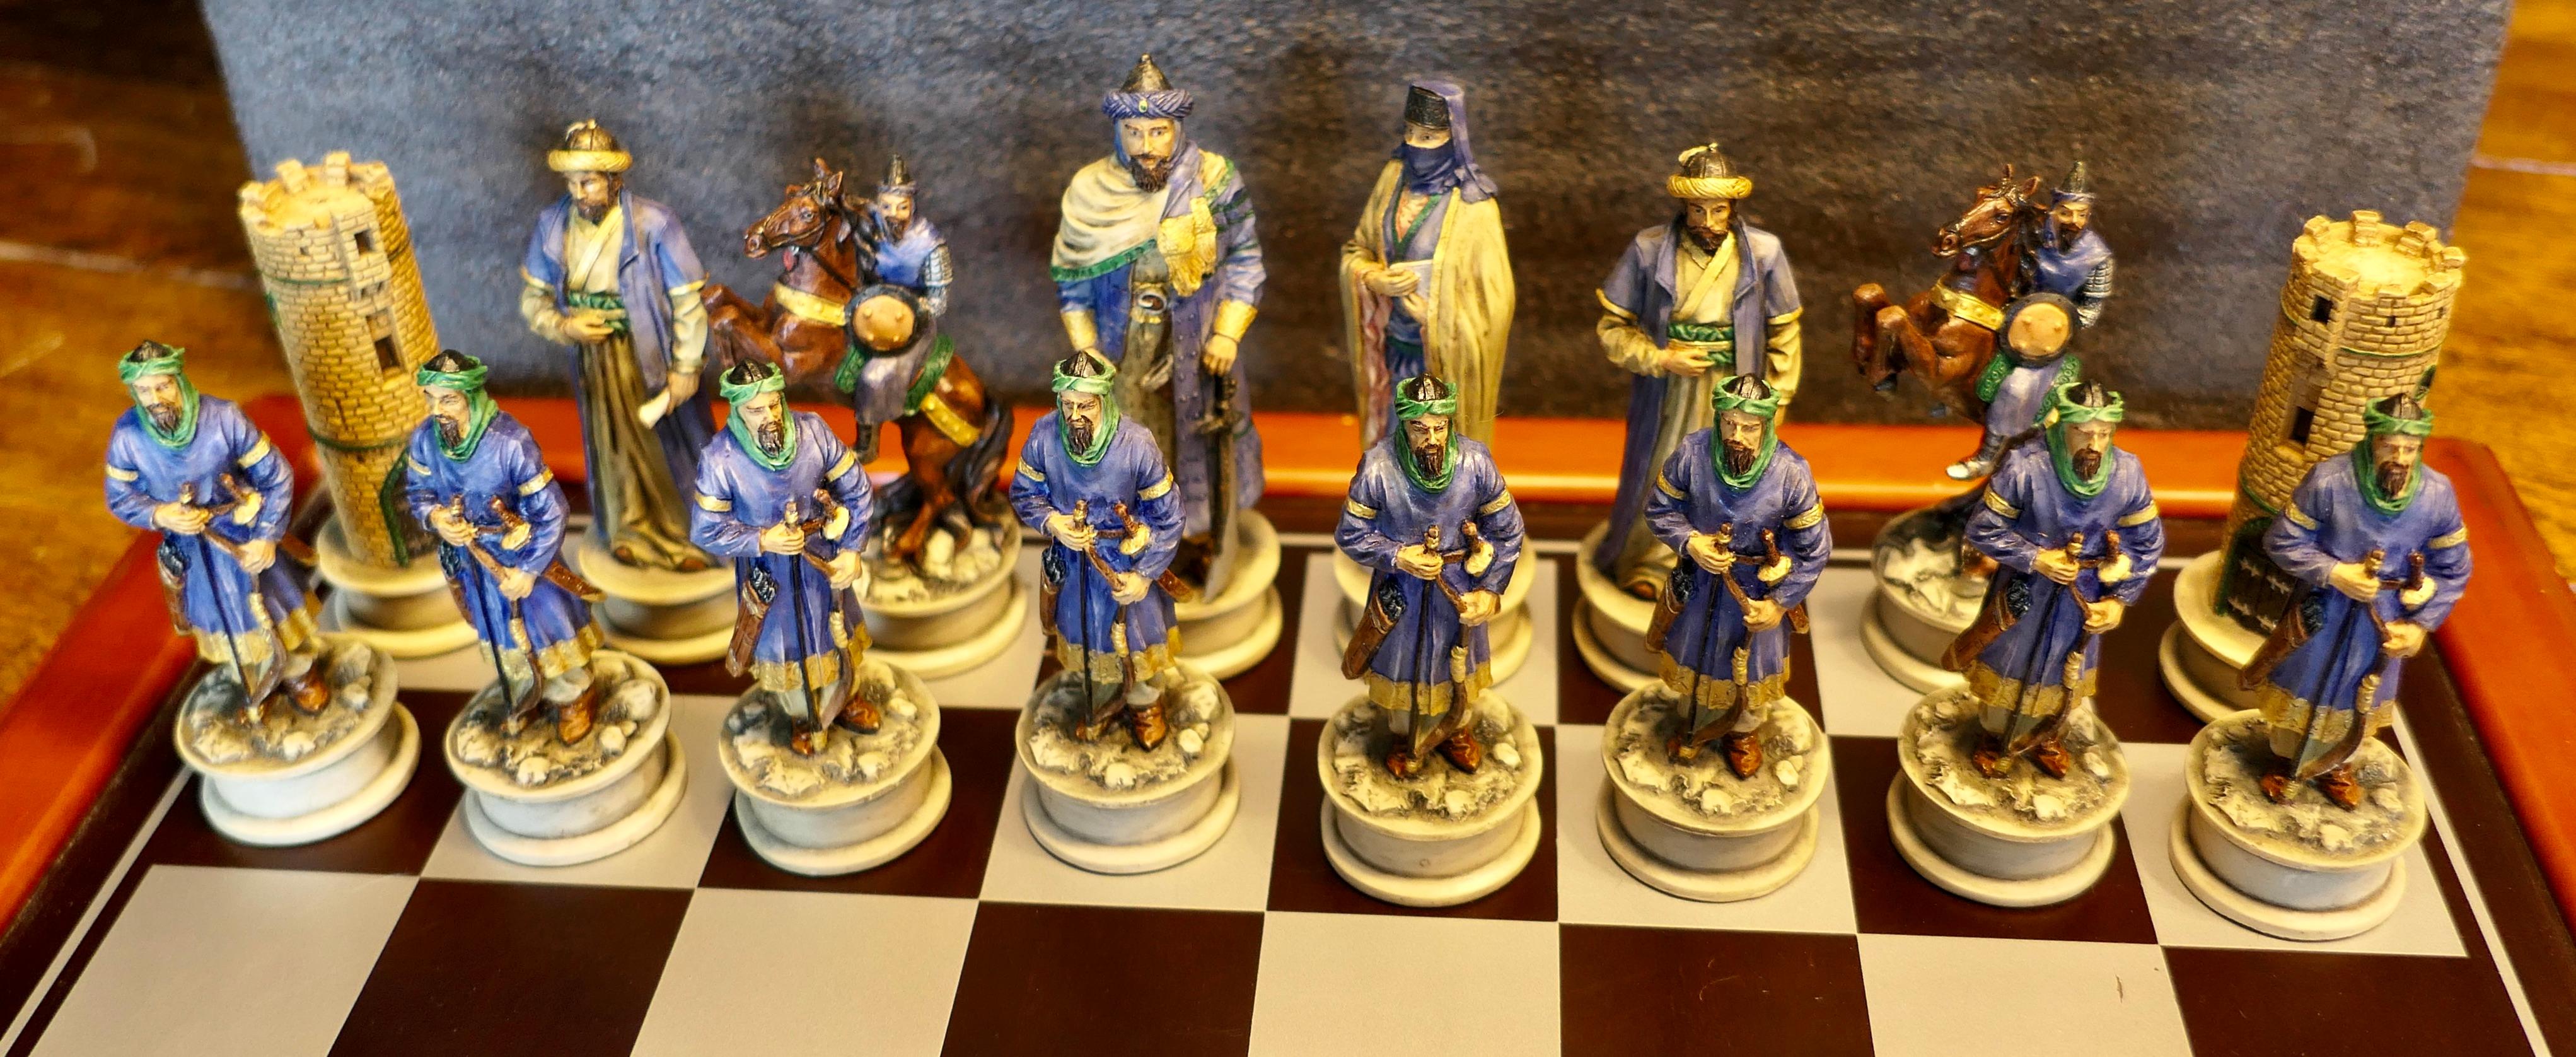 Folk Art Chess Set with Crusader and Saracen Figures  An interesting slant on the game   For Sale